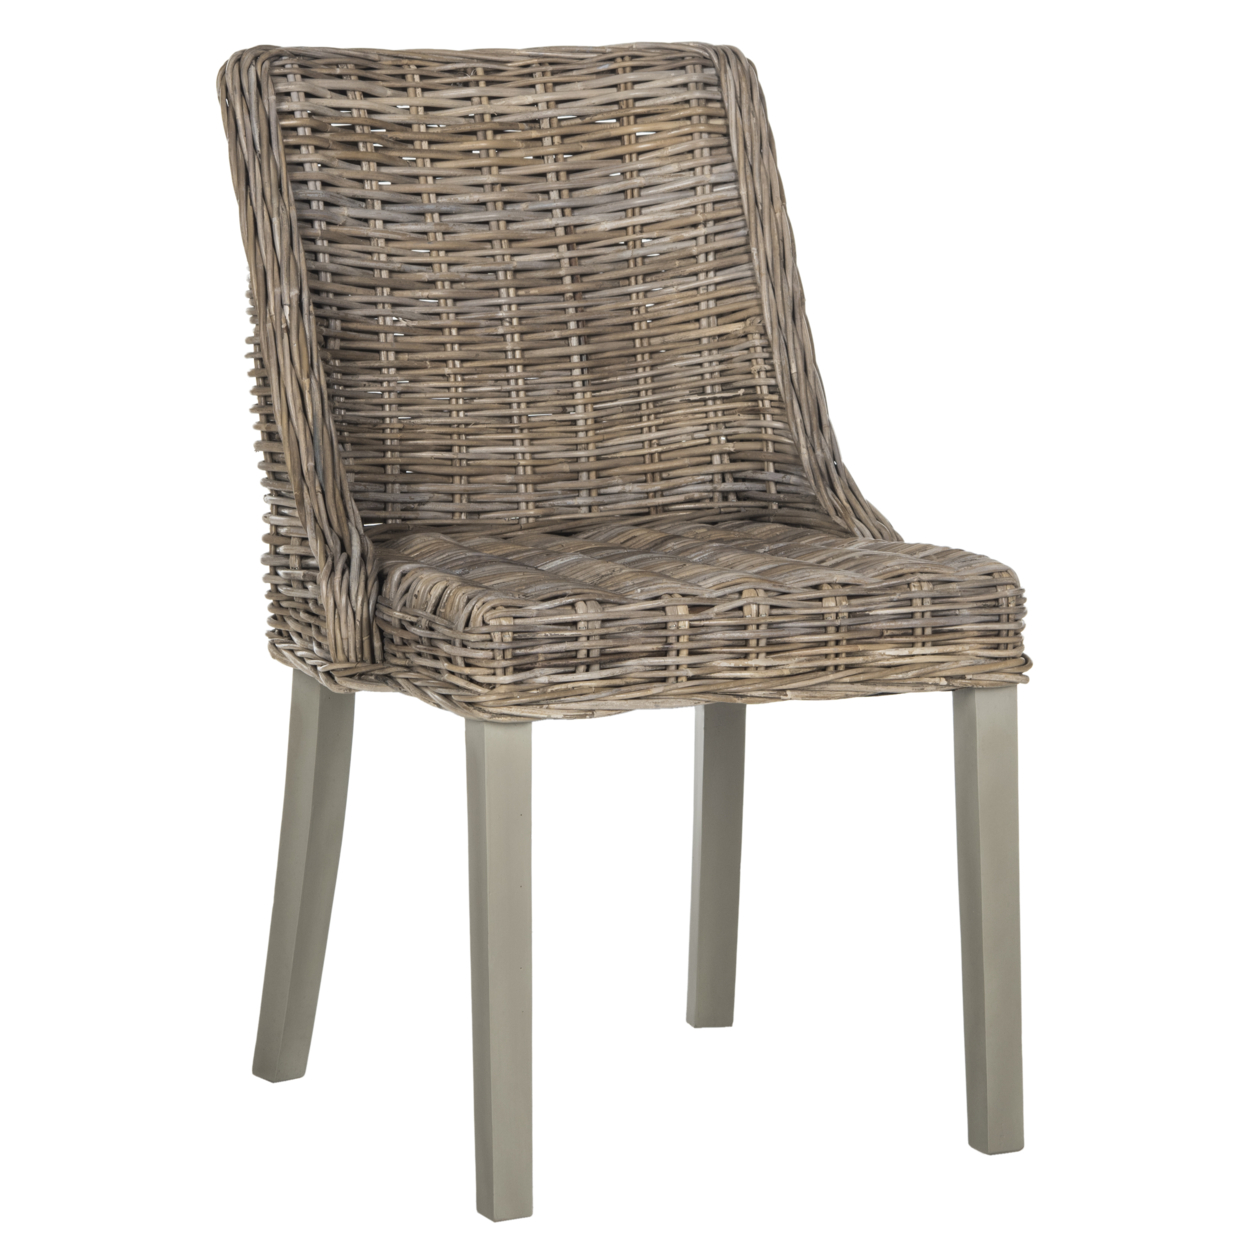 SAFAVIEH Caprice 18''H Wicker Dining Chair With Leather Handle Grey